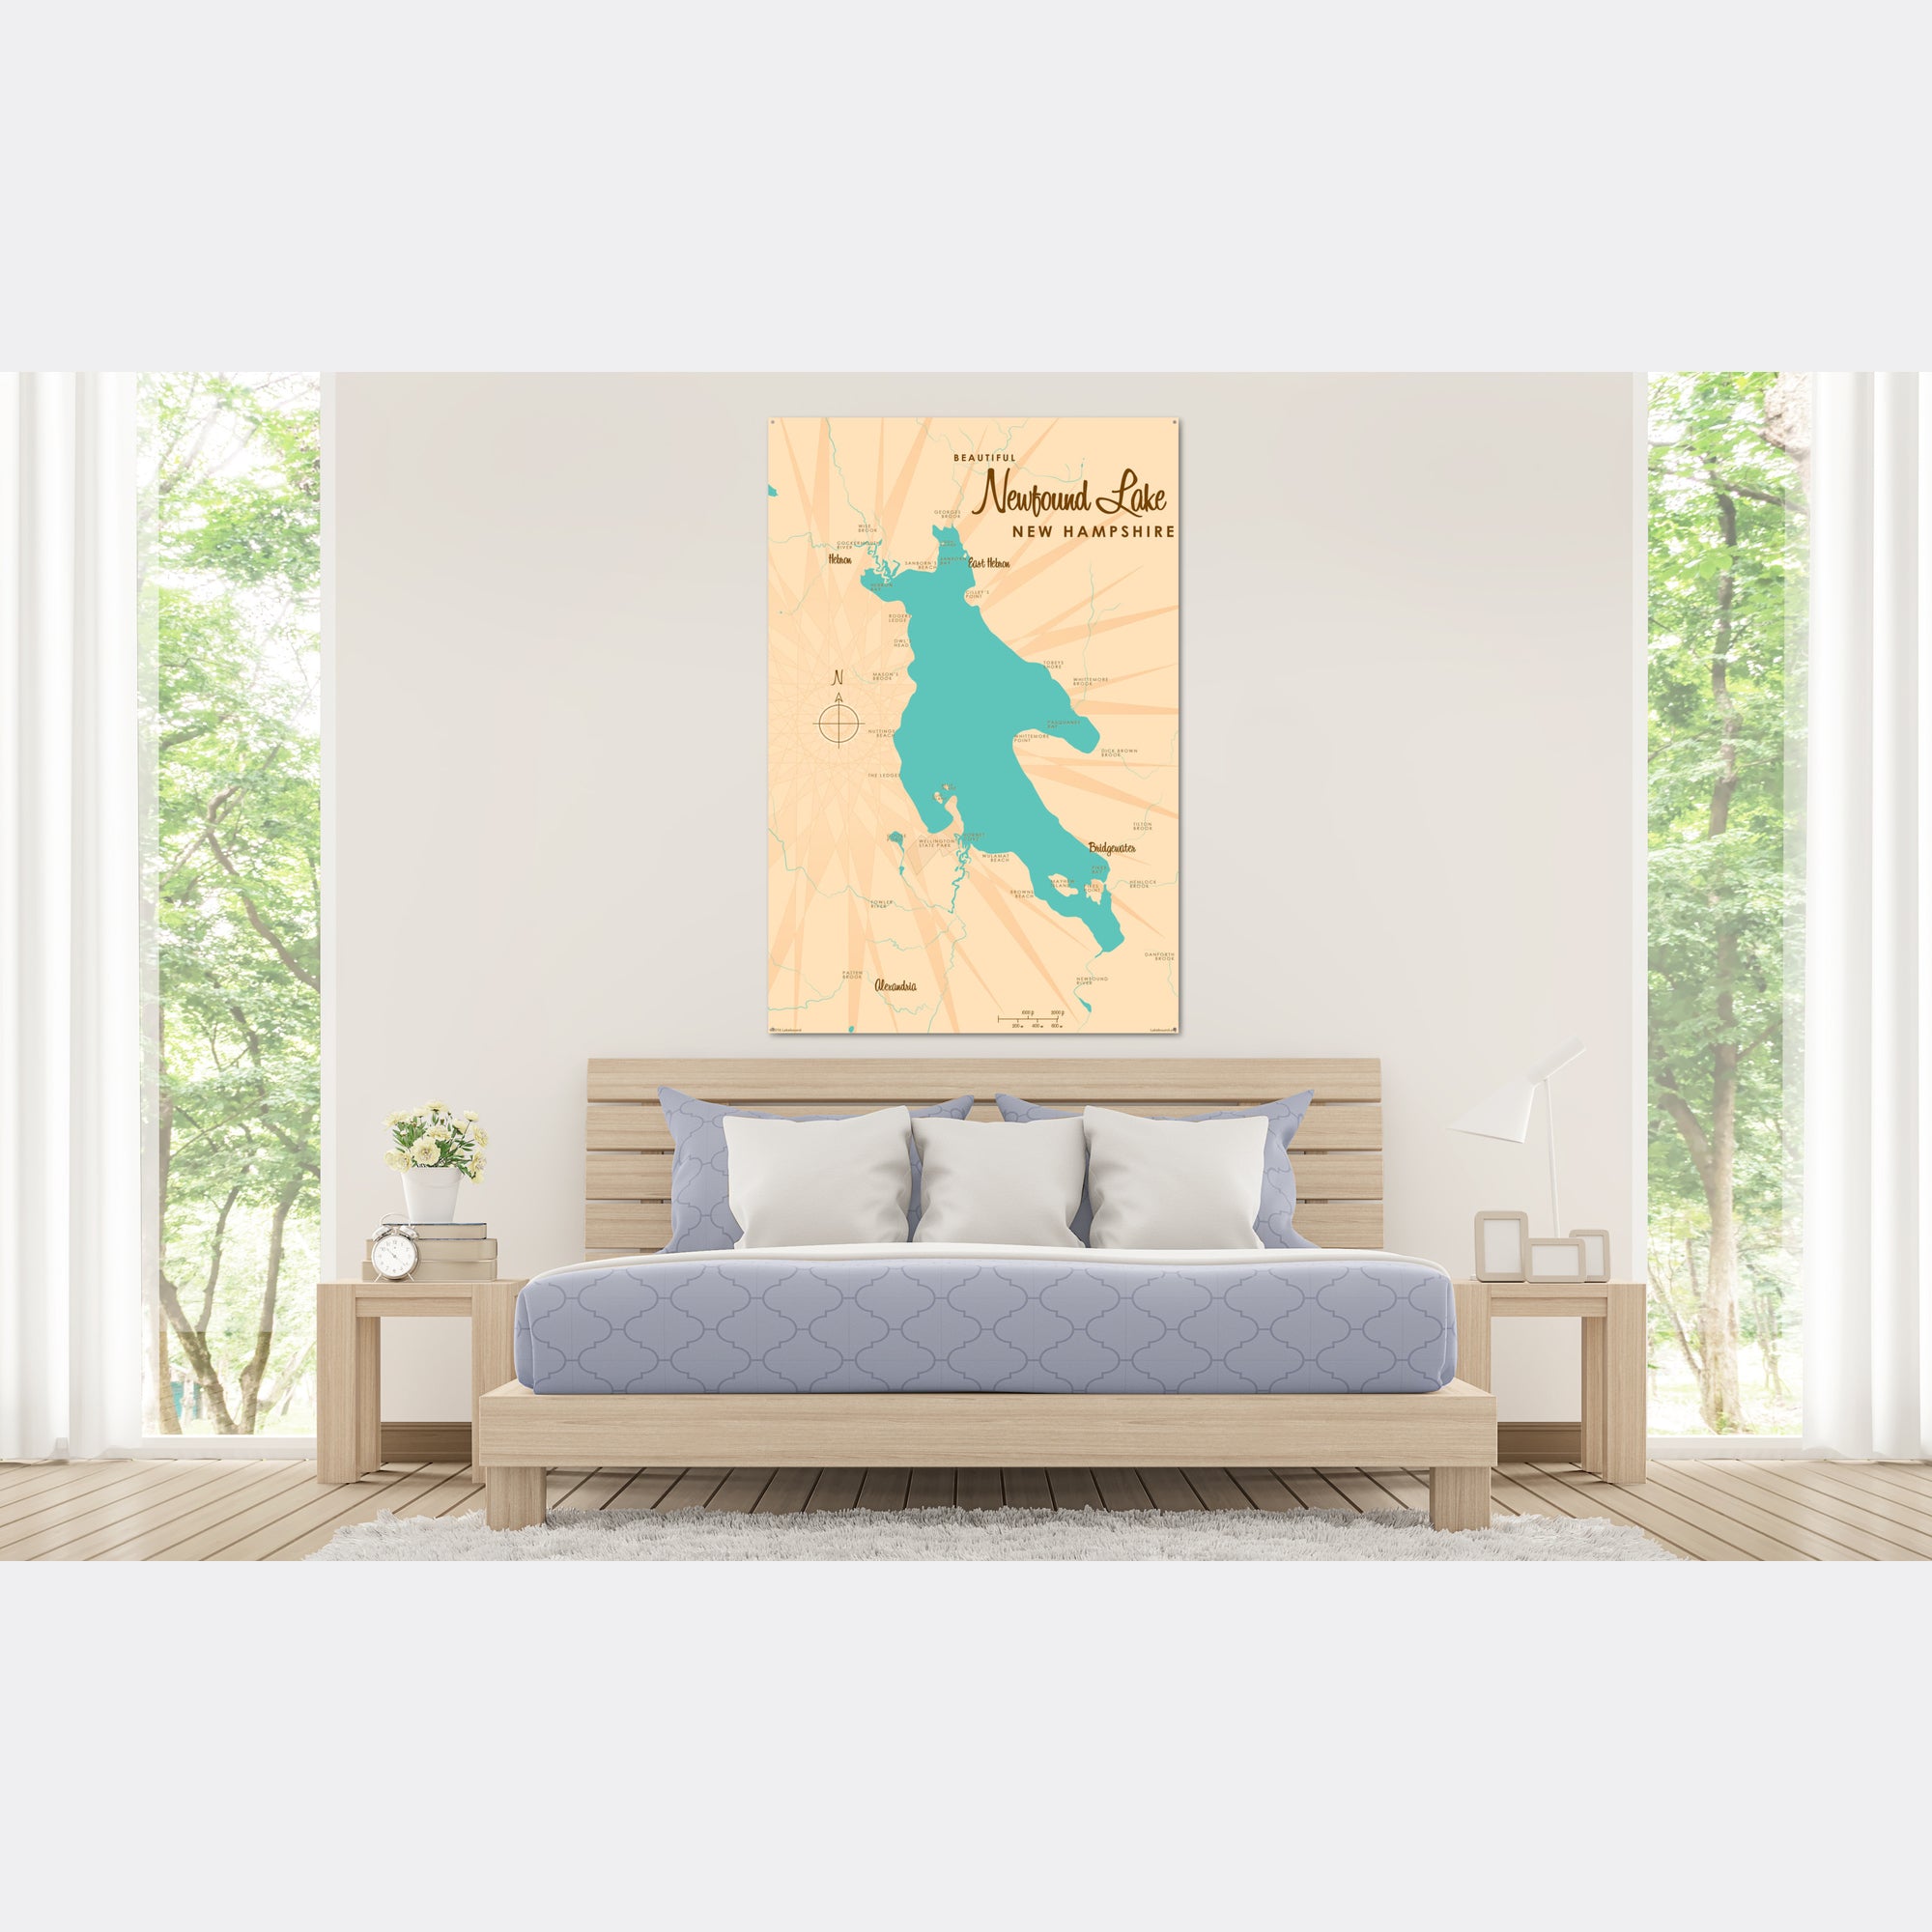 Newfound Lake New Hampshire, Metal Sign Map Art